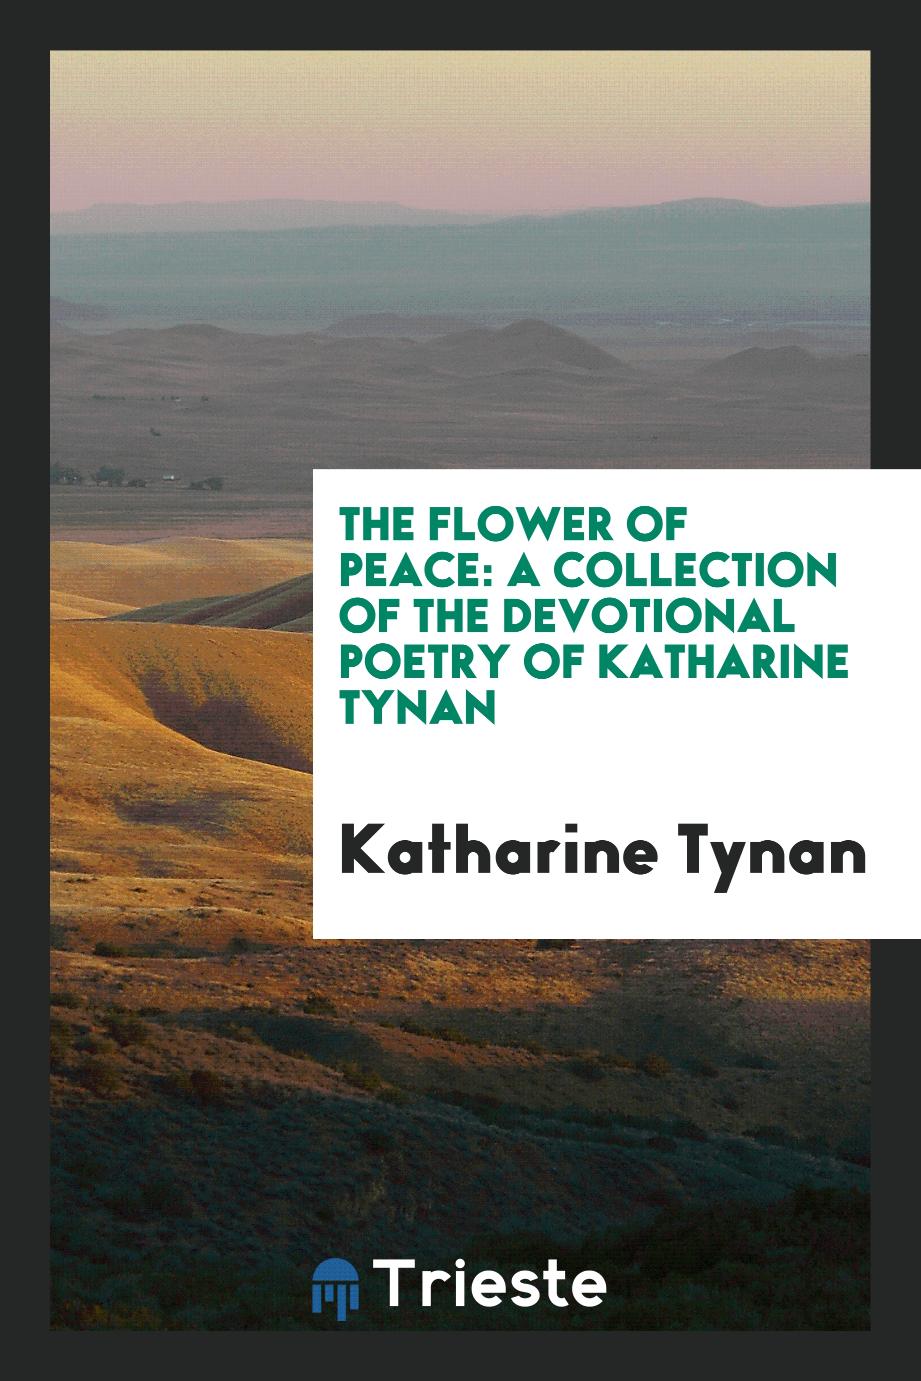 The flower of peace: a collection of the devotional poetry of Katharine Tynan